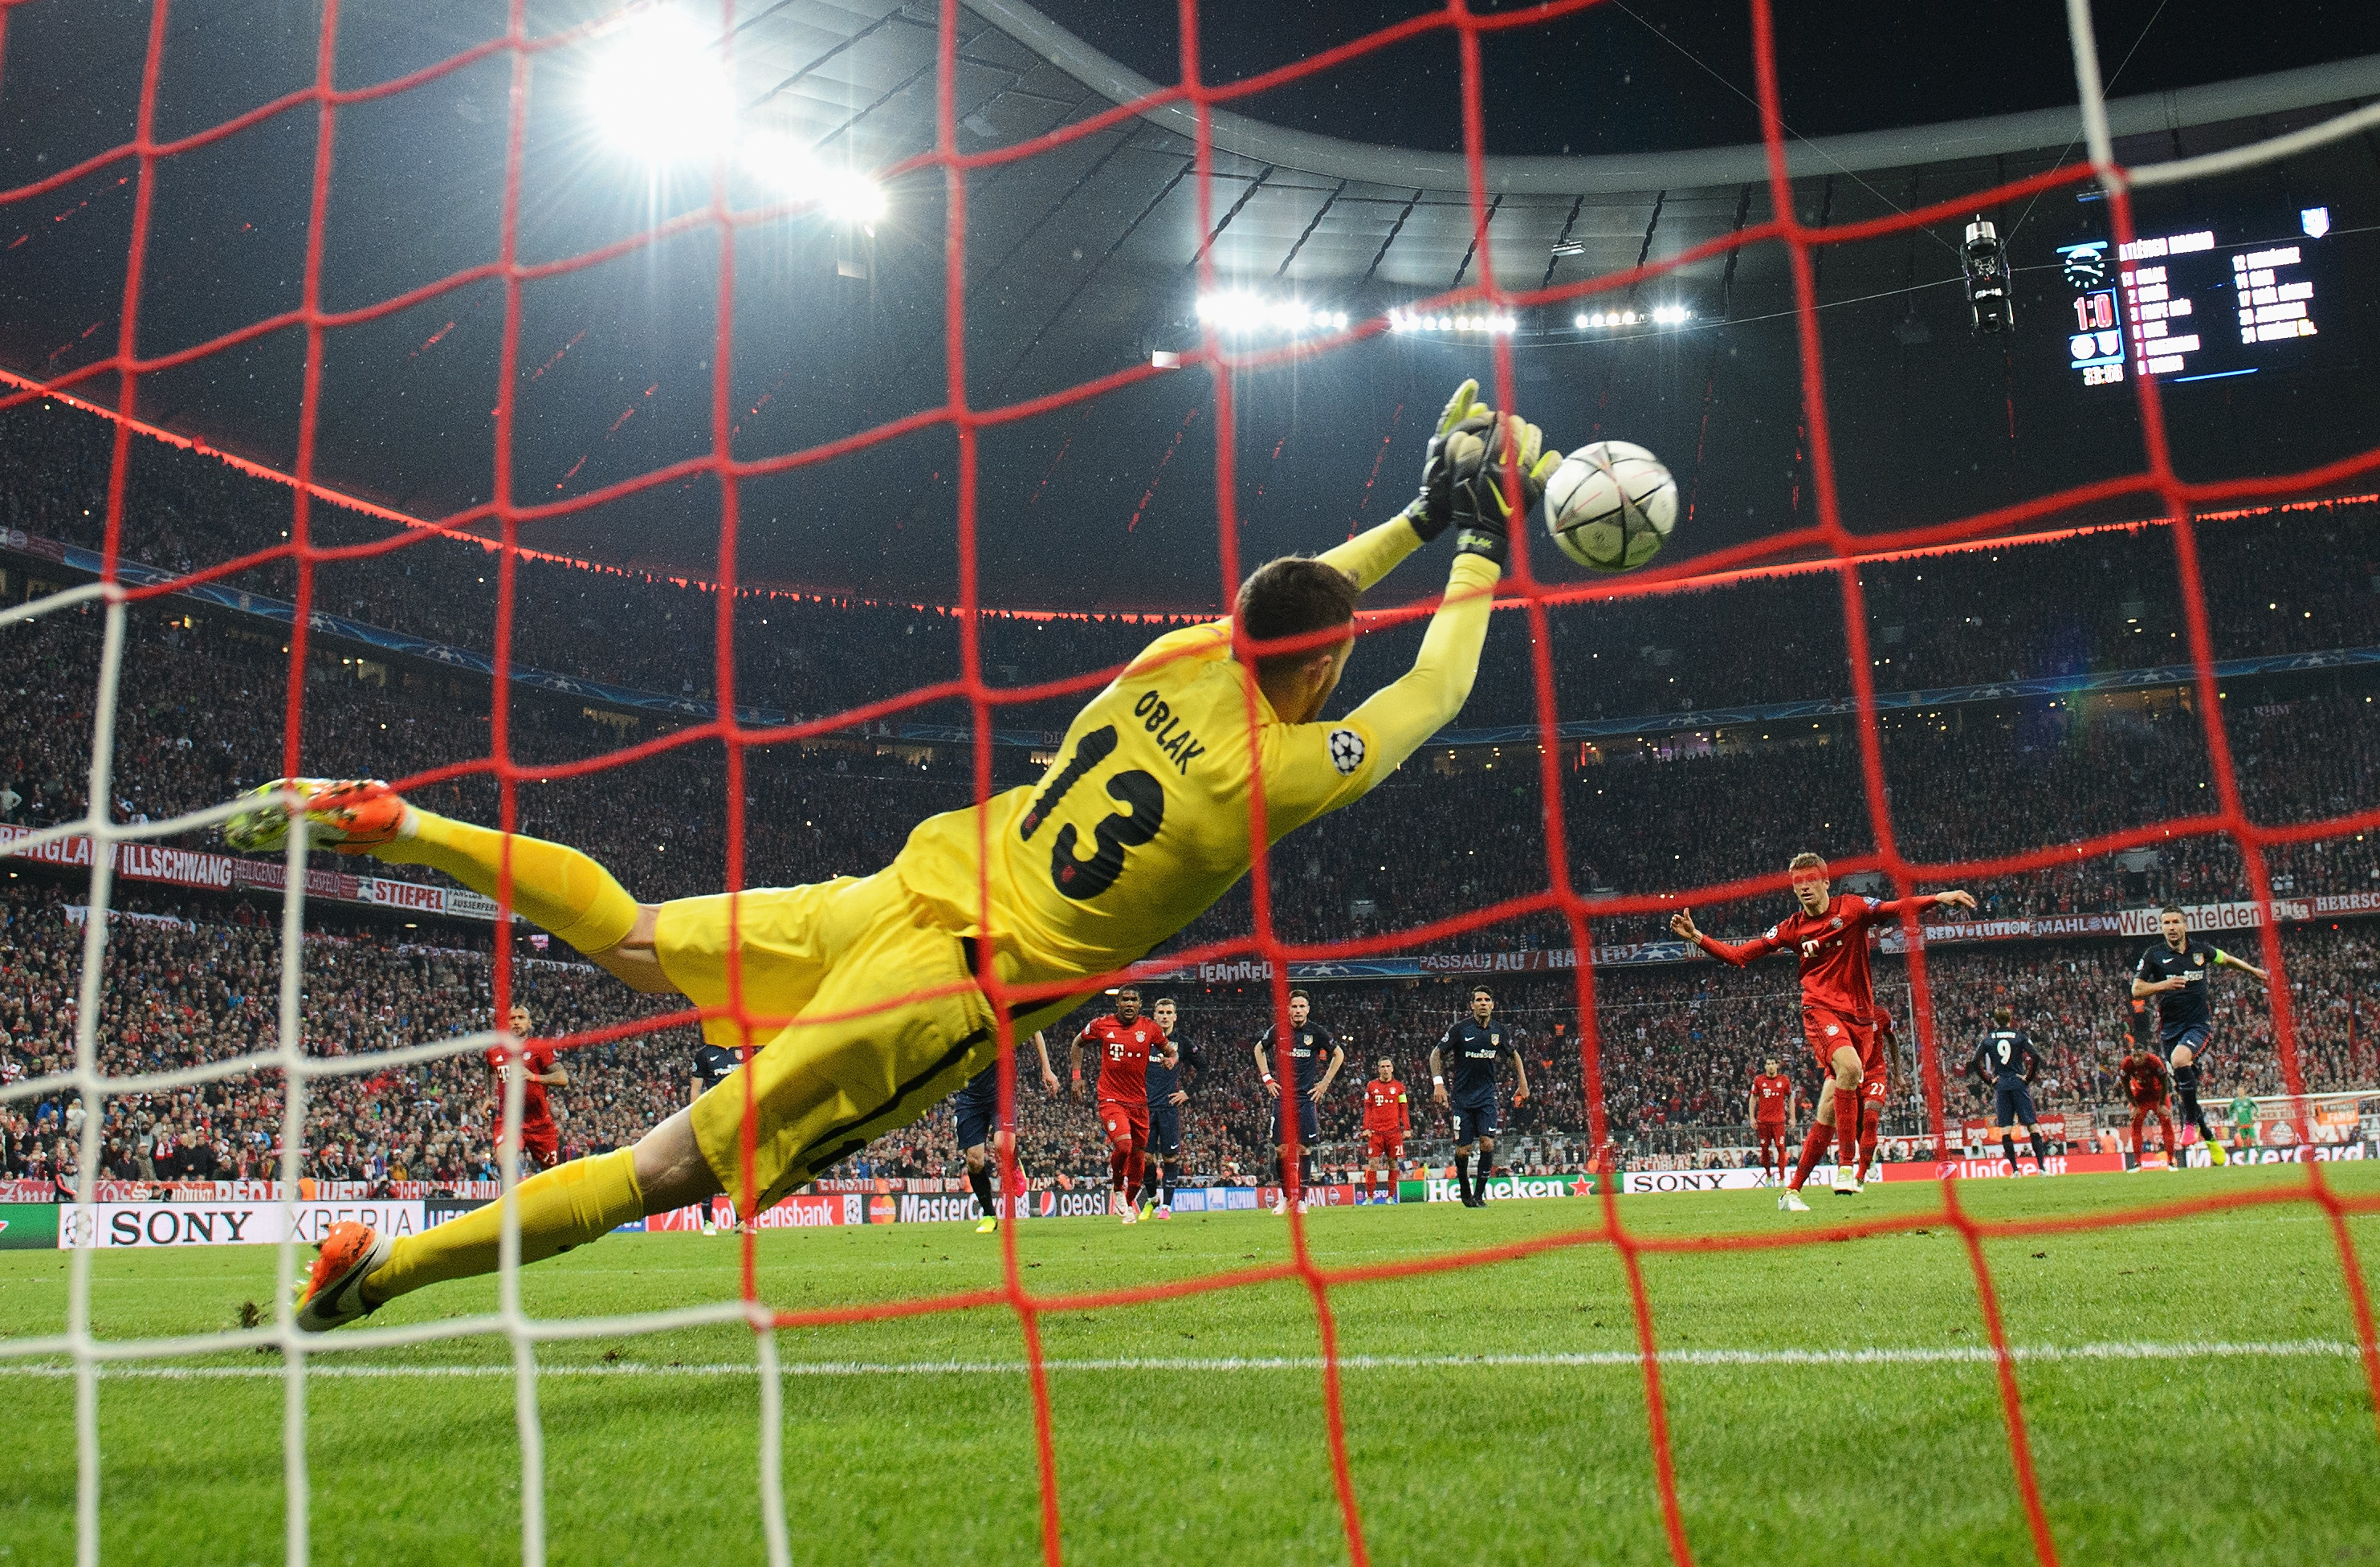 Atletico Madrid goalkeeper Jan Oblak saves a penalty from Bayern Munich's Thomas Muller in the Champions League in 2016.